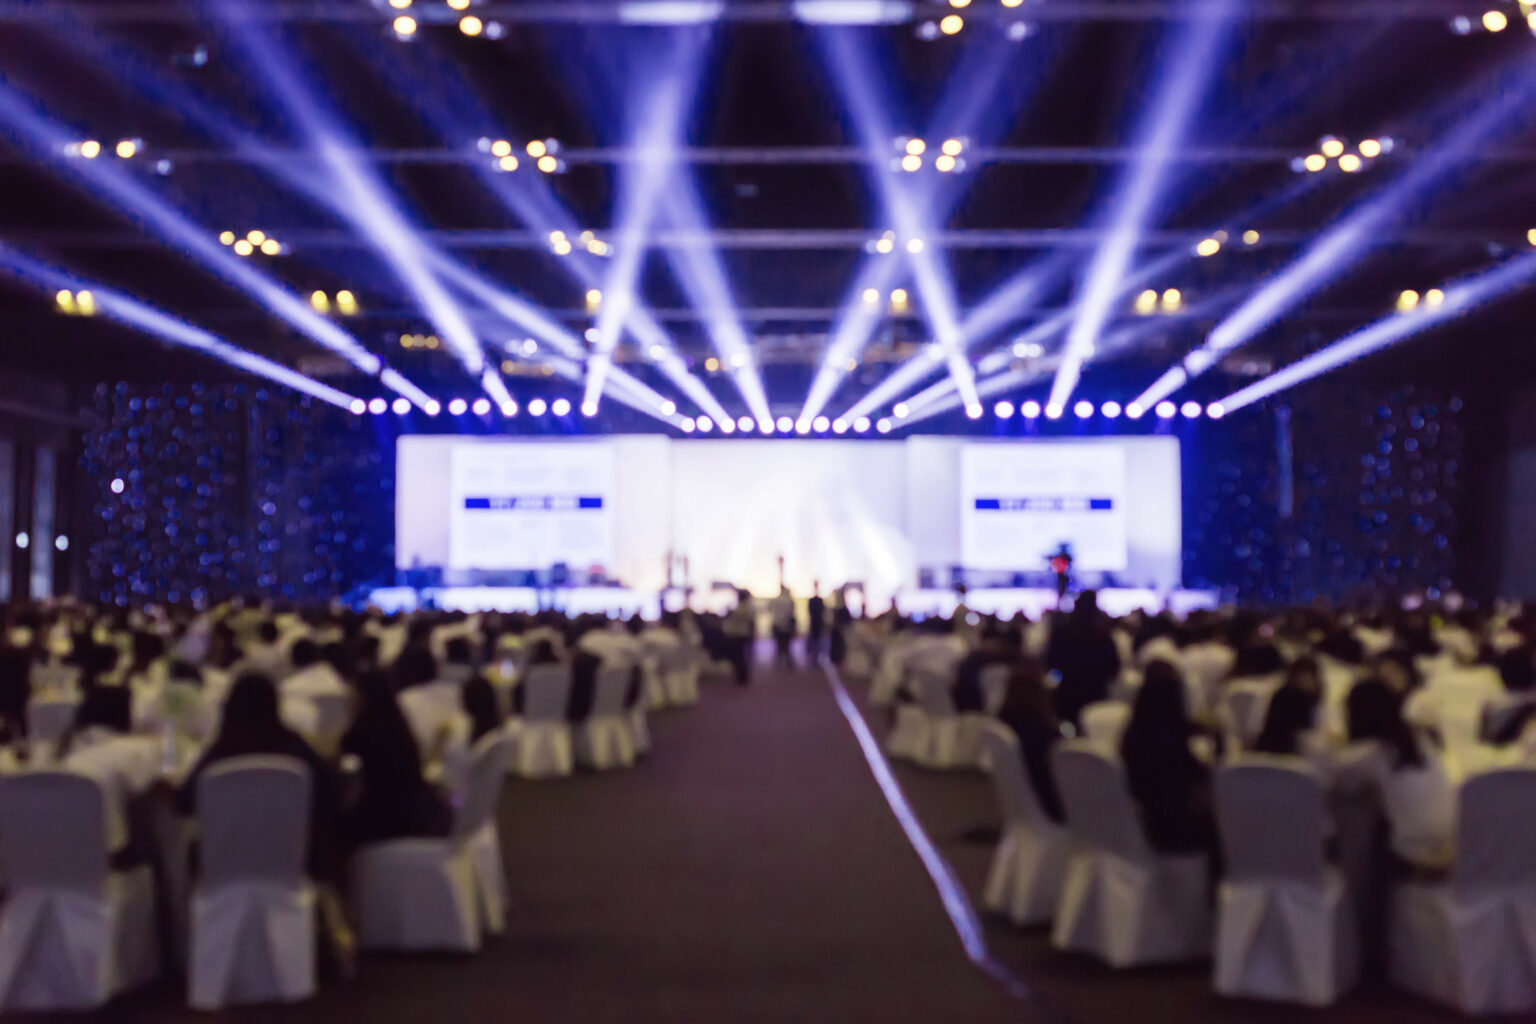 Lights, Camera, Auction: The Art of AV Production for Charity Events